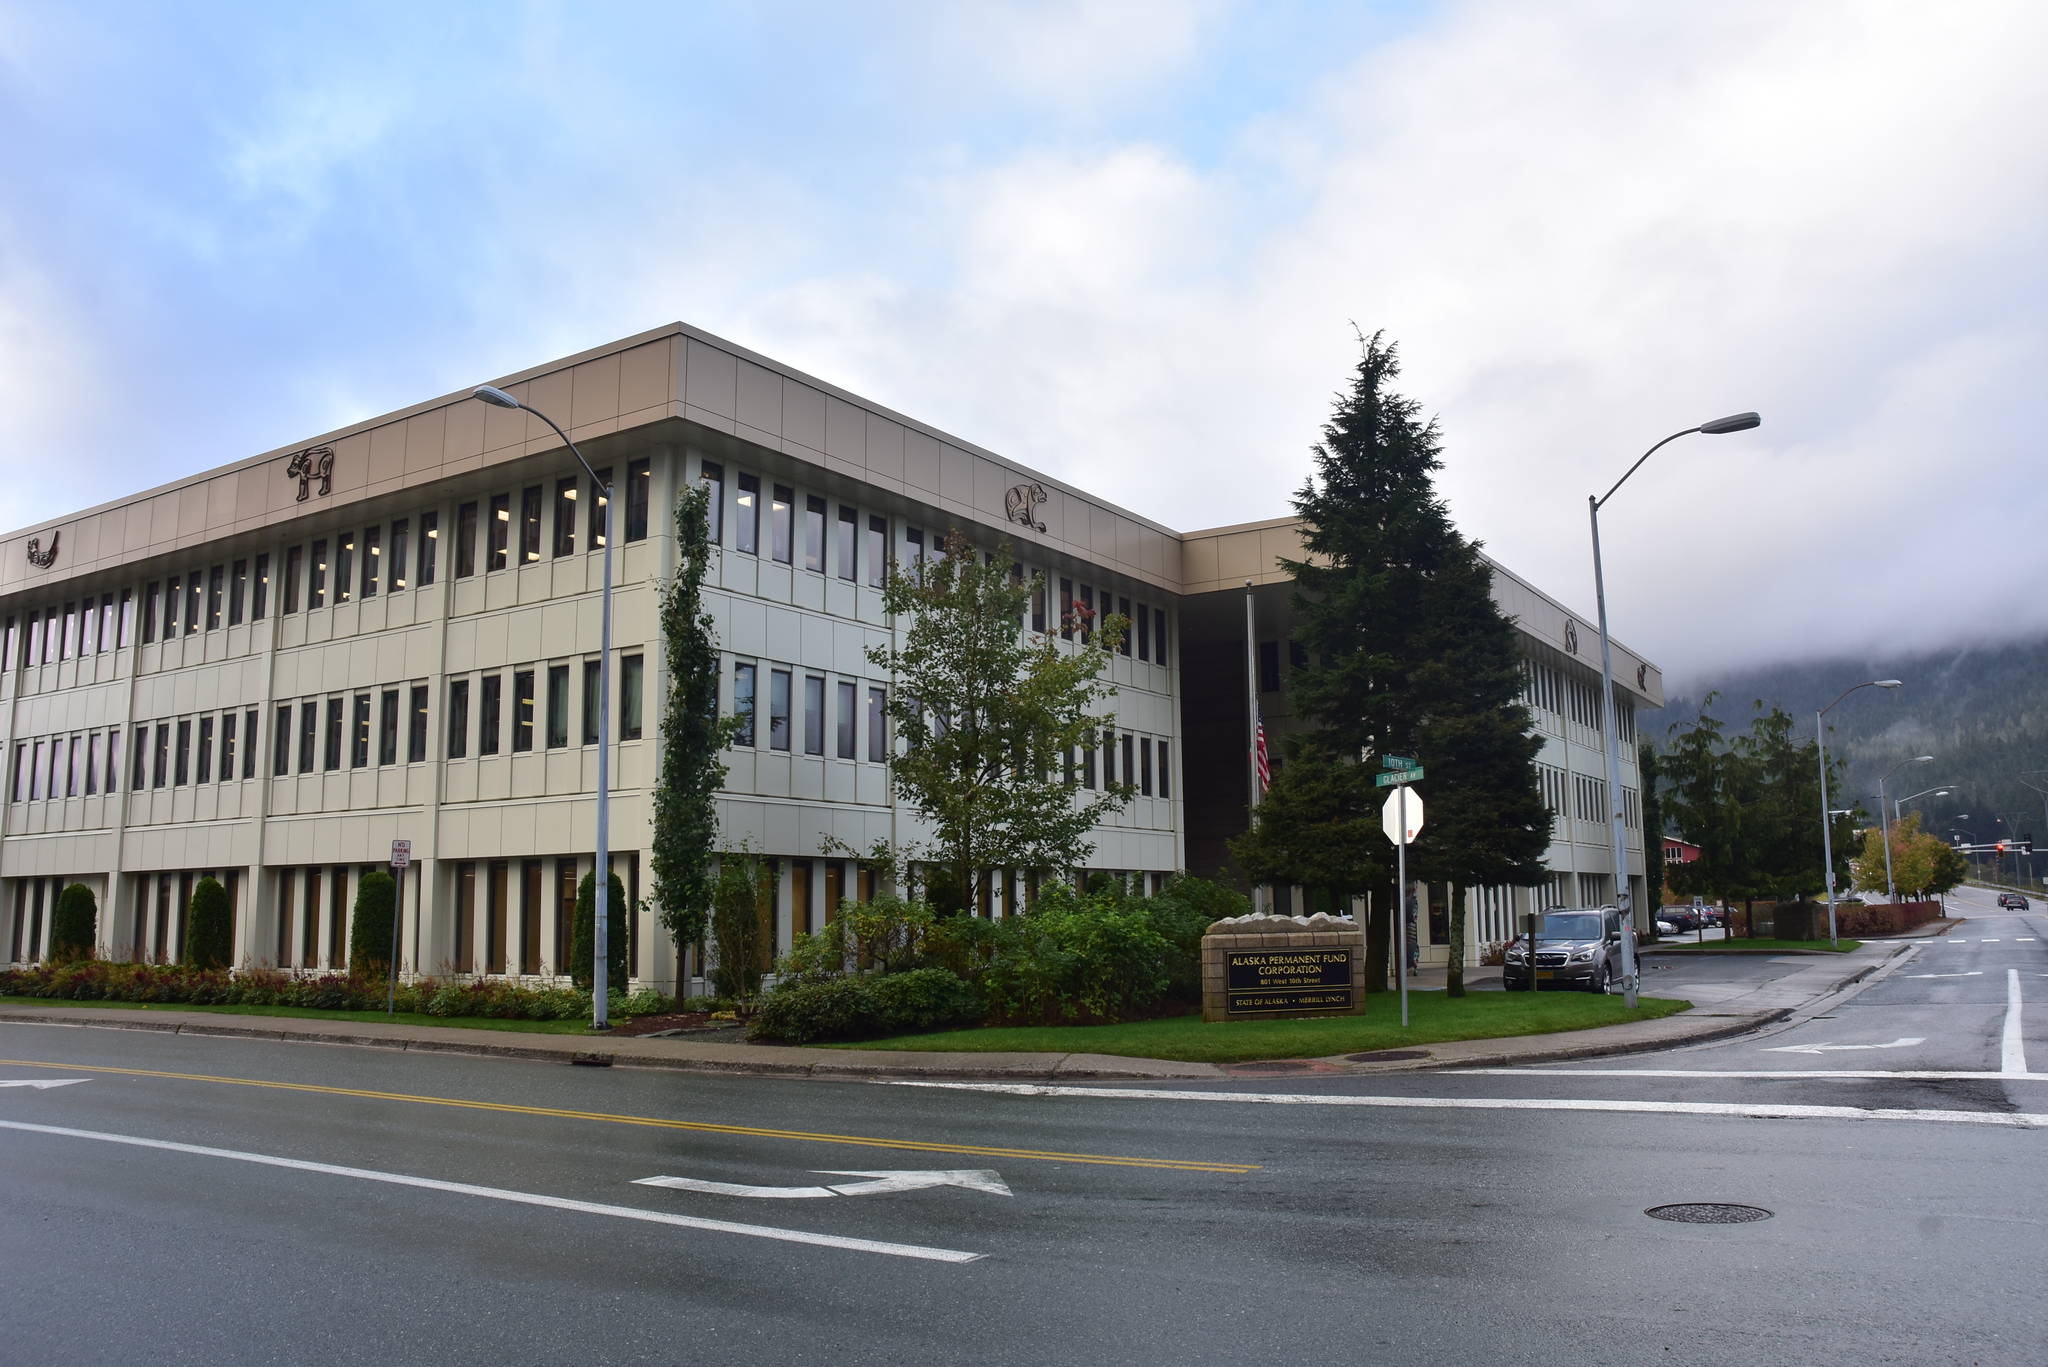 The Alaska Permanent Fund Corporation building in Juneau on Thursday, October 1, 2020. The corporation's CEO Angela Rodell spoke to the Juneau Chamber of Commerce Thursday saying the fund had remained strong during the pandemic in large part due to prudent management and past investments in the fund itself. (Peter Segall / Juneau Empire)